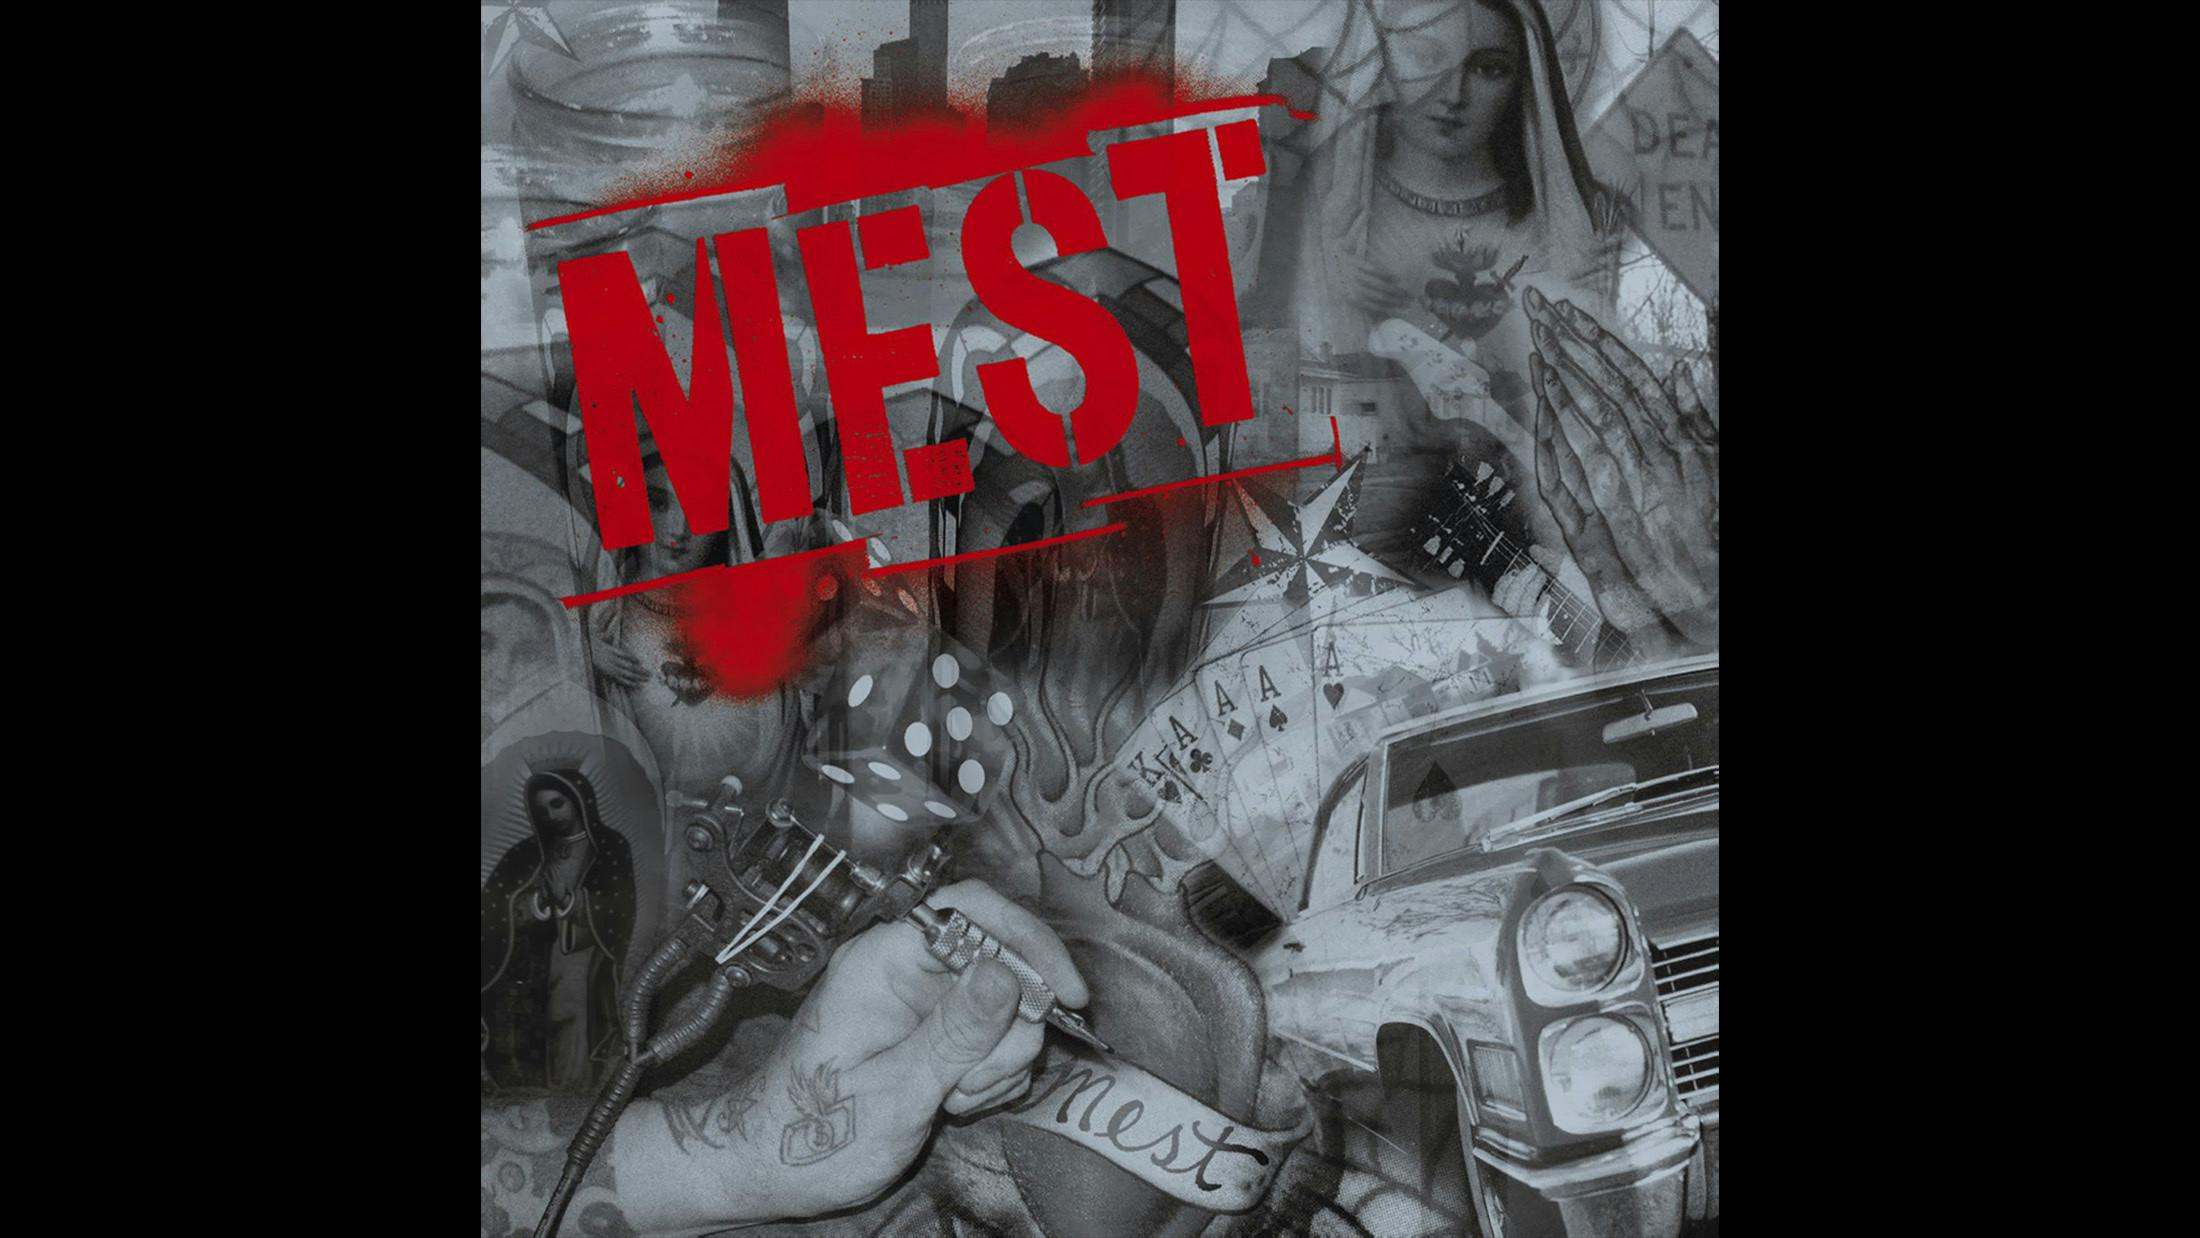 In the pop-punk family tree, Mest were Good Charlotte’s younger, slightly wayward brother. So, it’s fitting that Benji Madden lent his hand – and voice, on Jaded (These Years) – to this album. The GC touch, coupled with singer Tony Lovato’s ability to turn his darkest depths into catchy lines, saw the Chicago four-piece make their finest album.